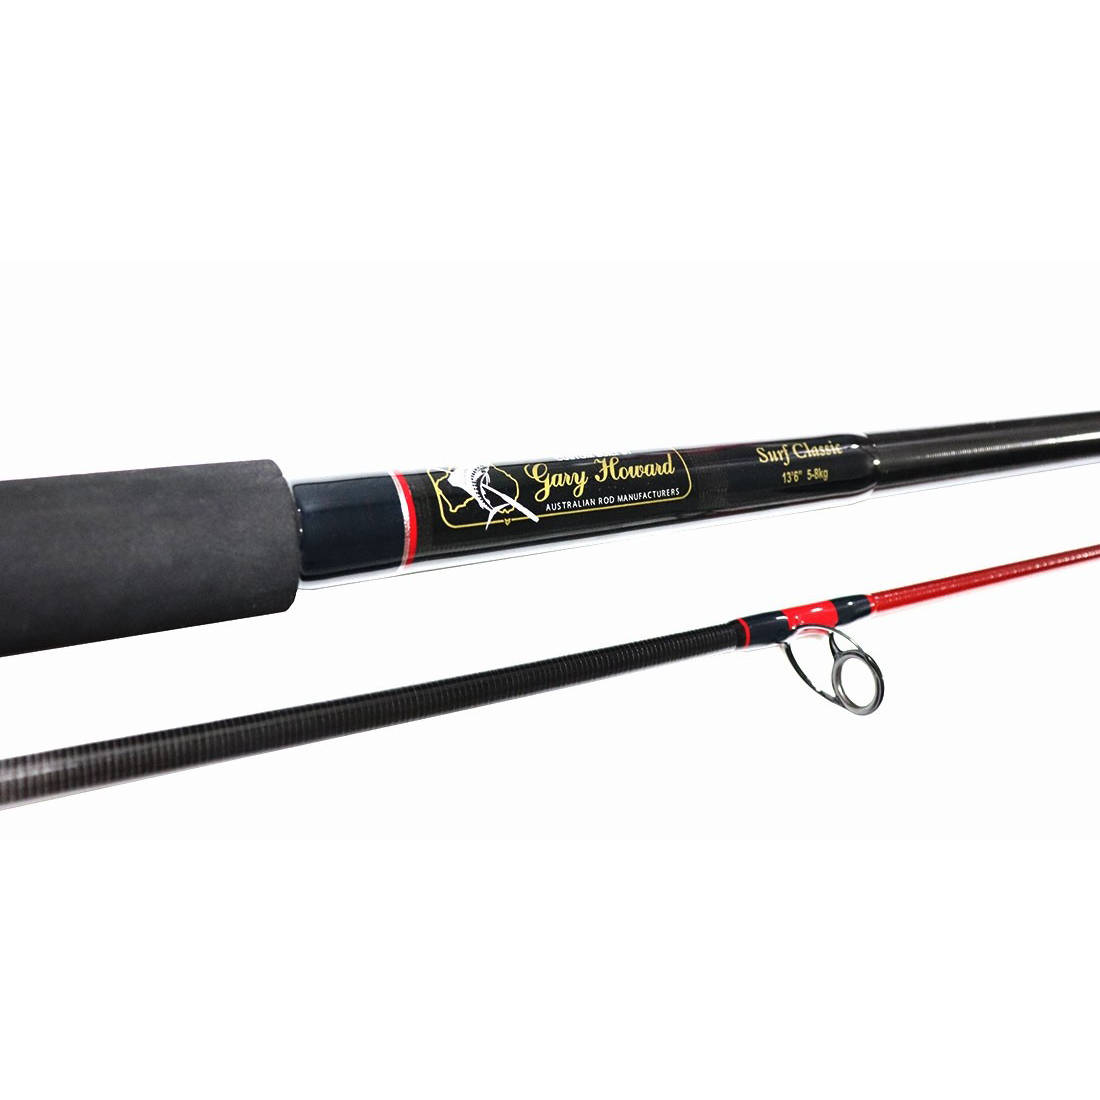 Gary Howard Surf Classic 13ft 6in Surf Rod